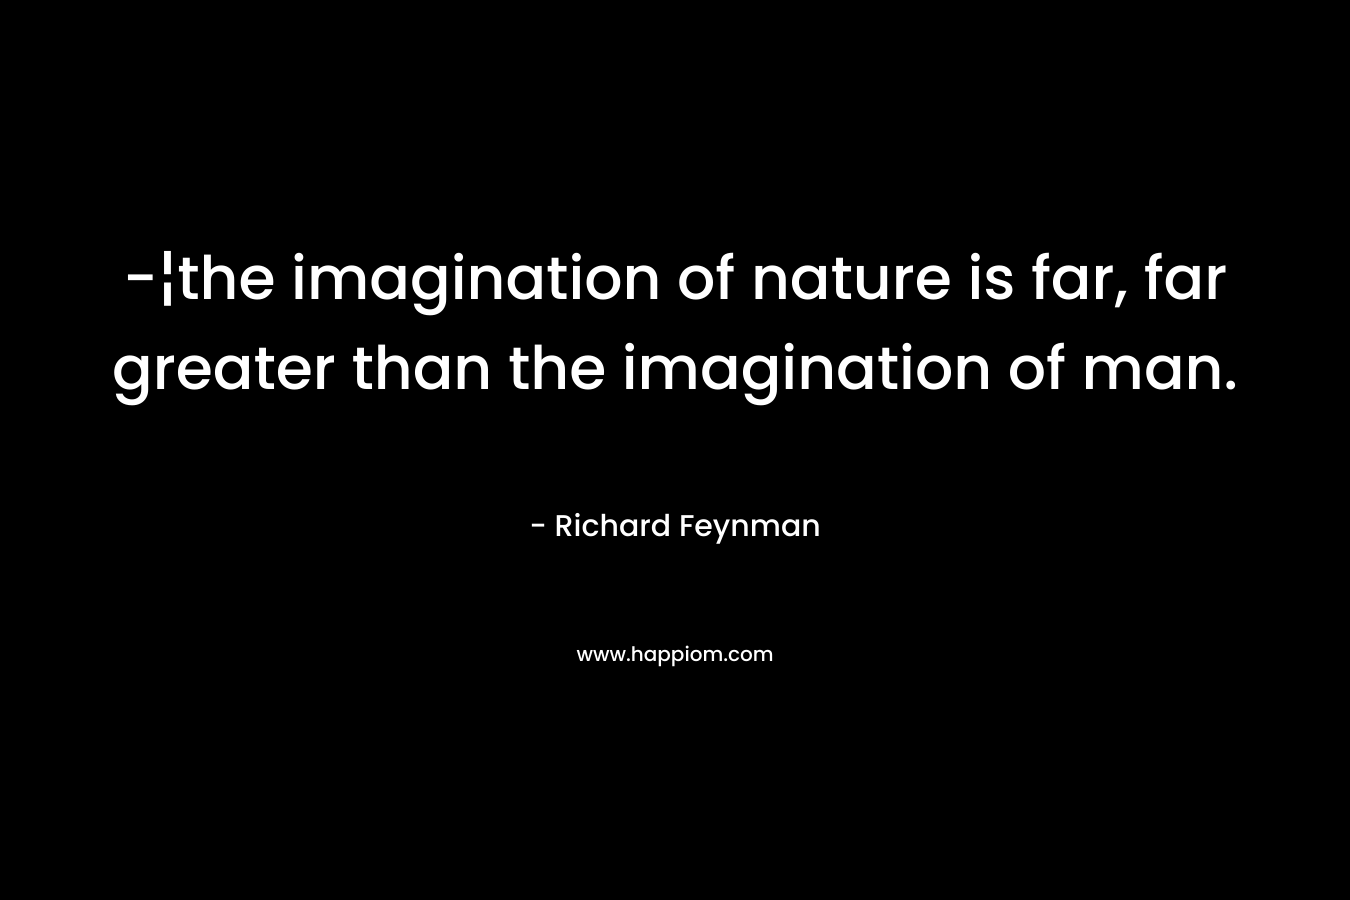 -¦the imagination of nature is far, far greater than the imagination of man.